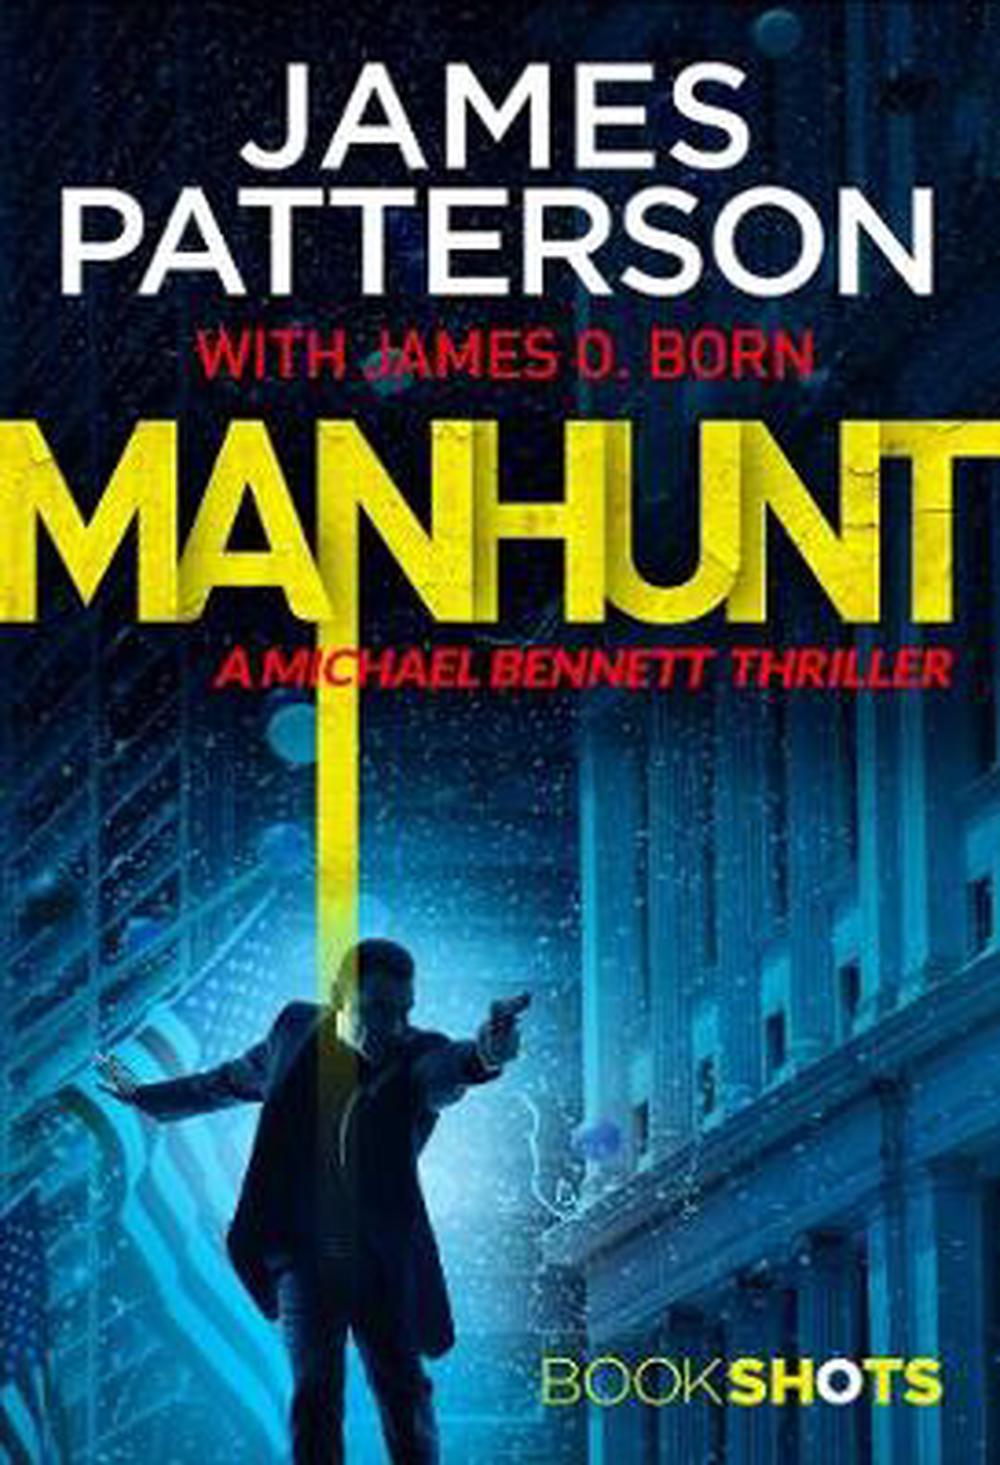 Manhunt by James Patterson, Paperback, 9781786531896 | Buy online at ...